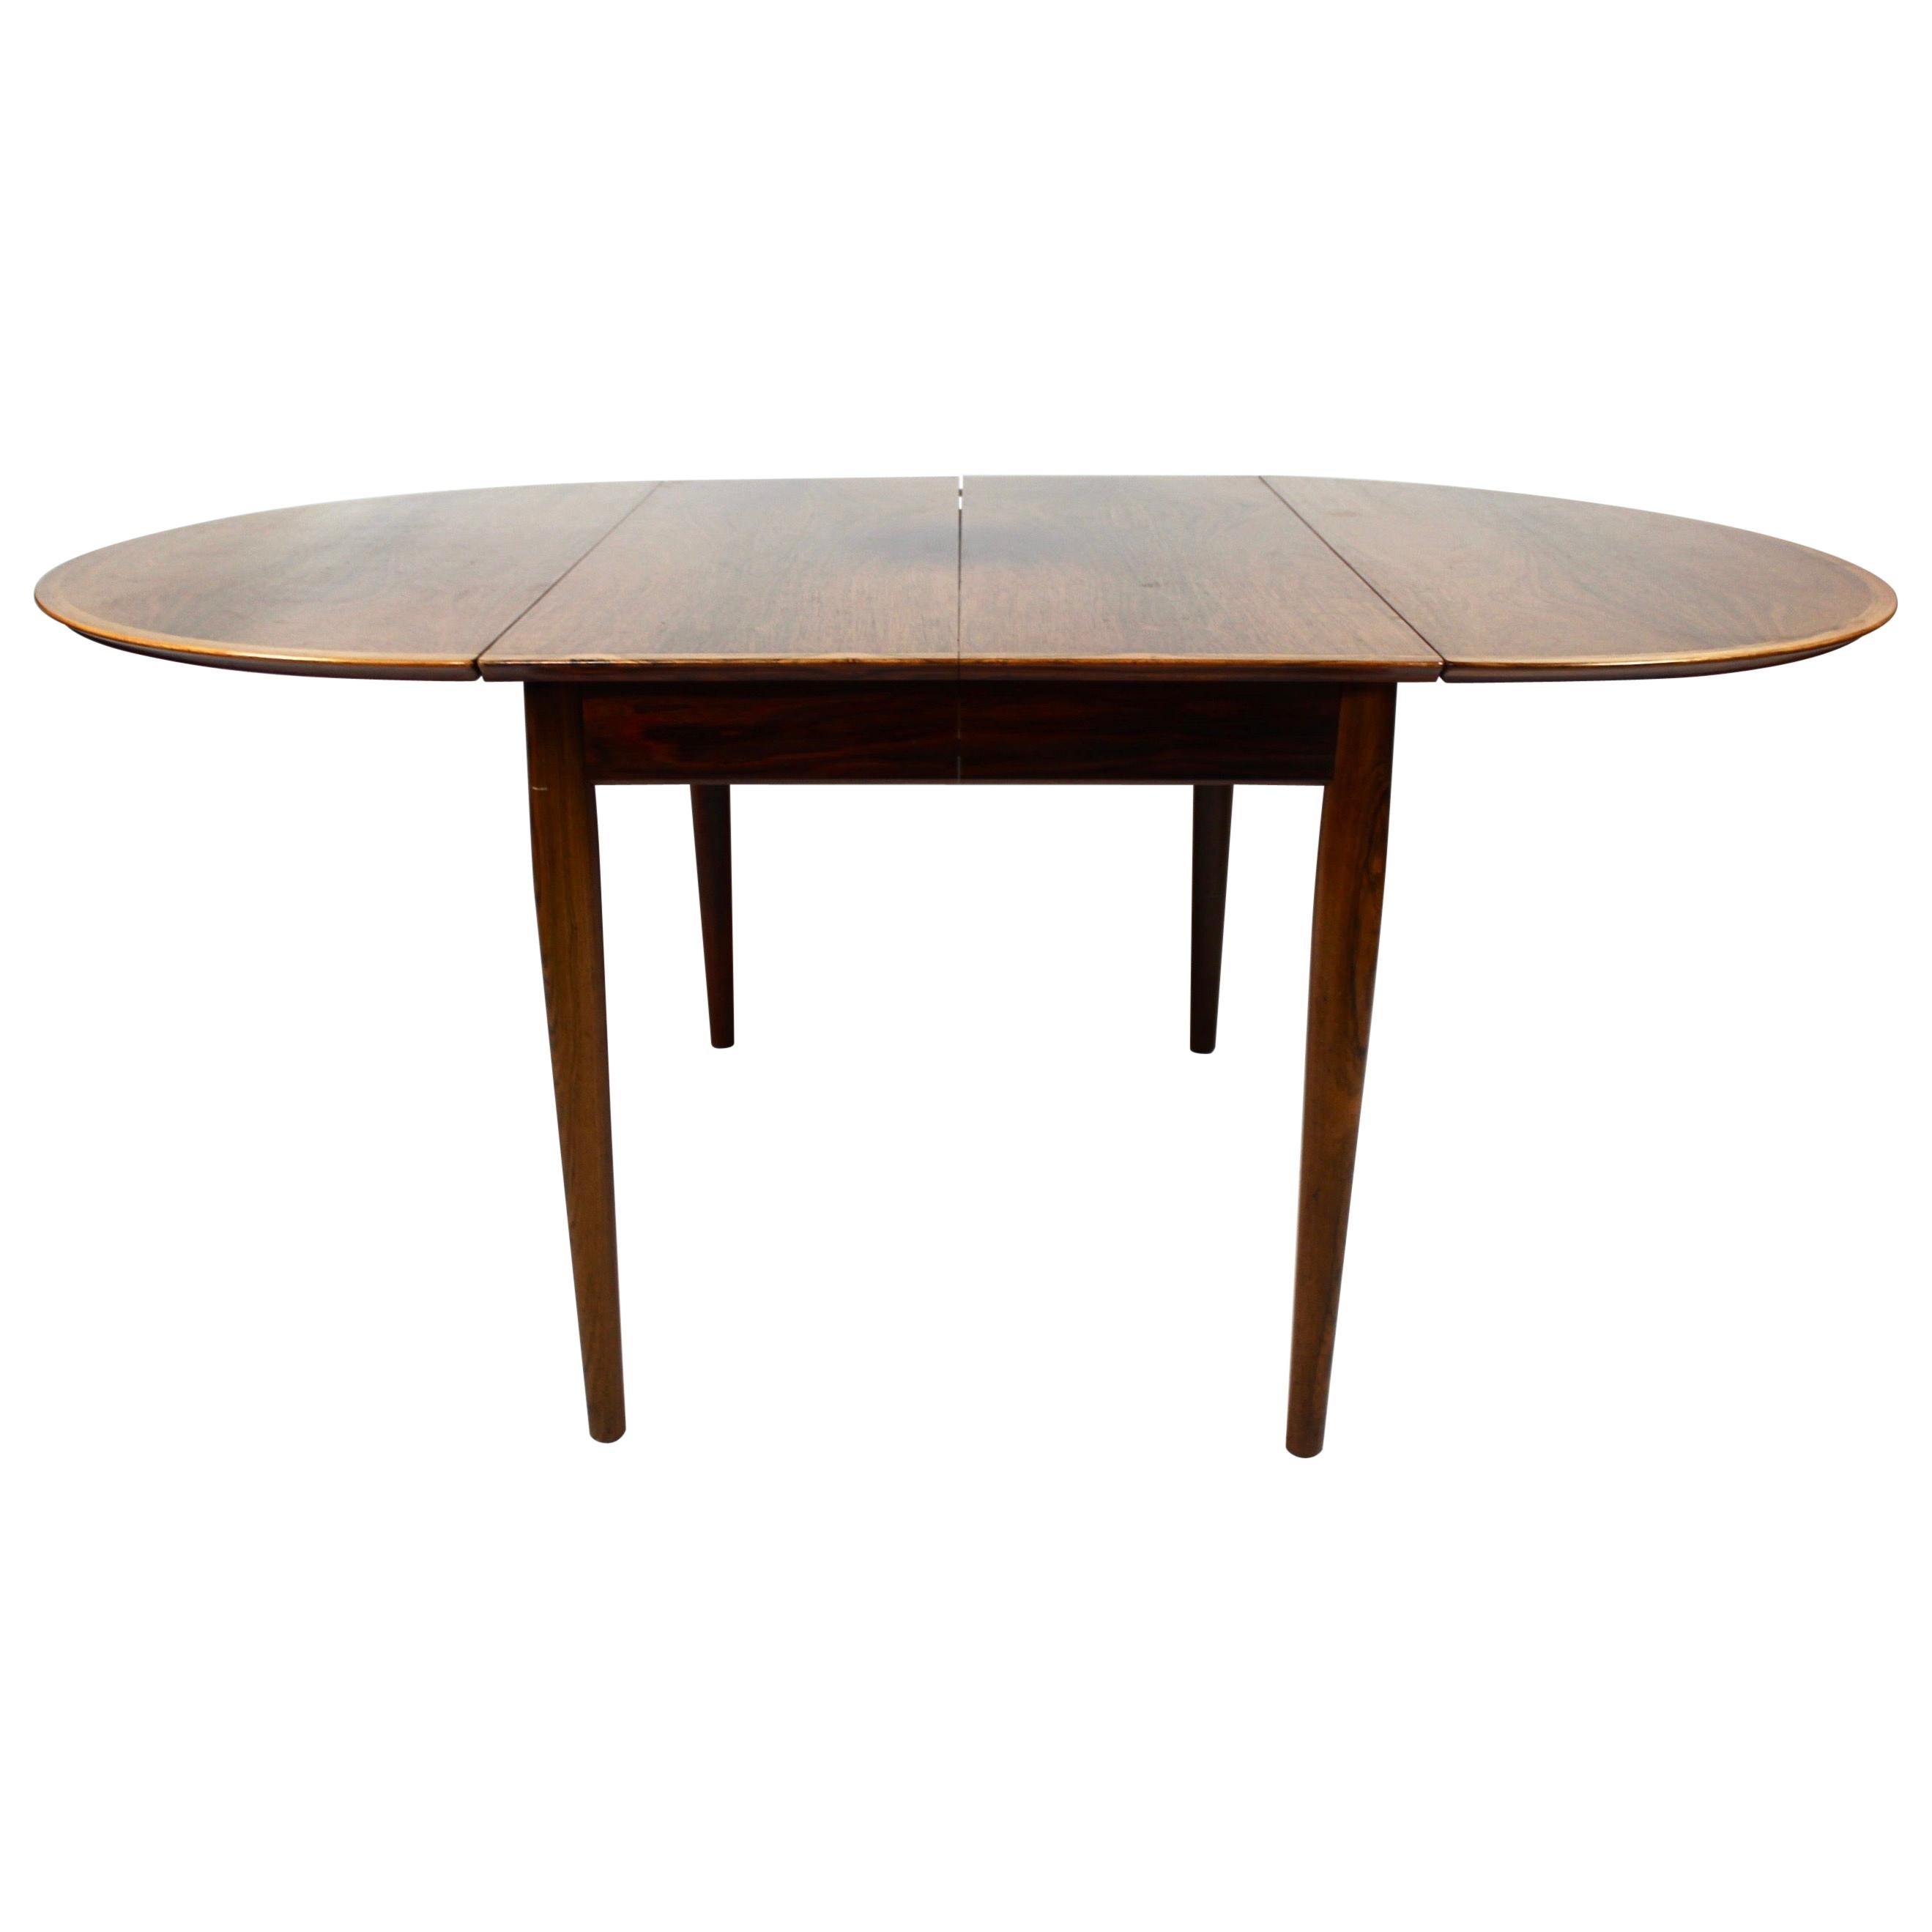 Dining Table with Extensions in Rosewood of Danish Design from the 1960s